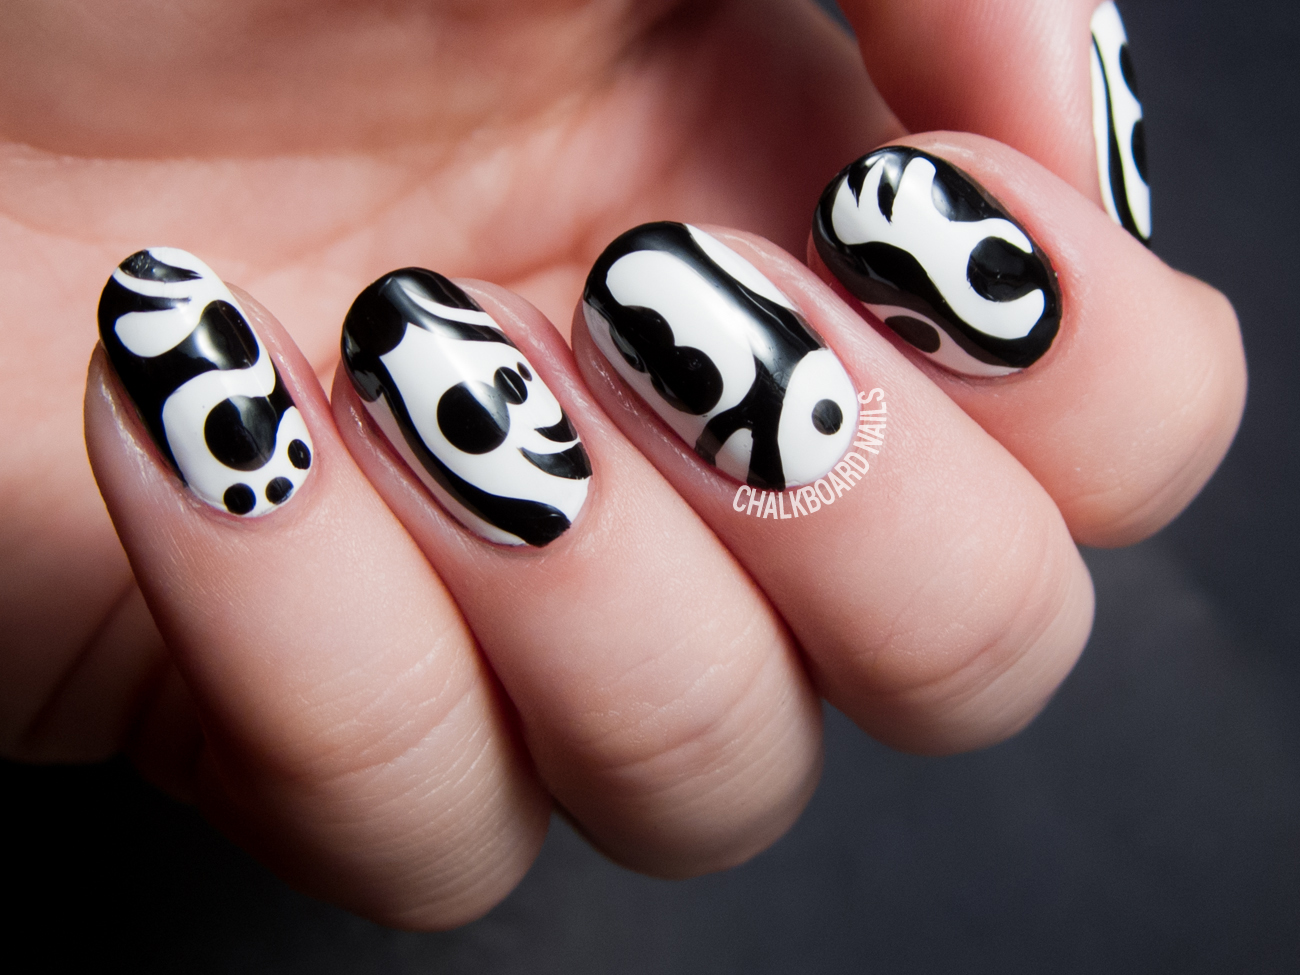 Black and white nails by @chalkboardnails